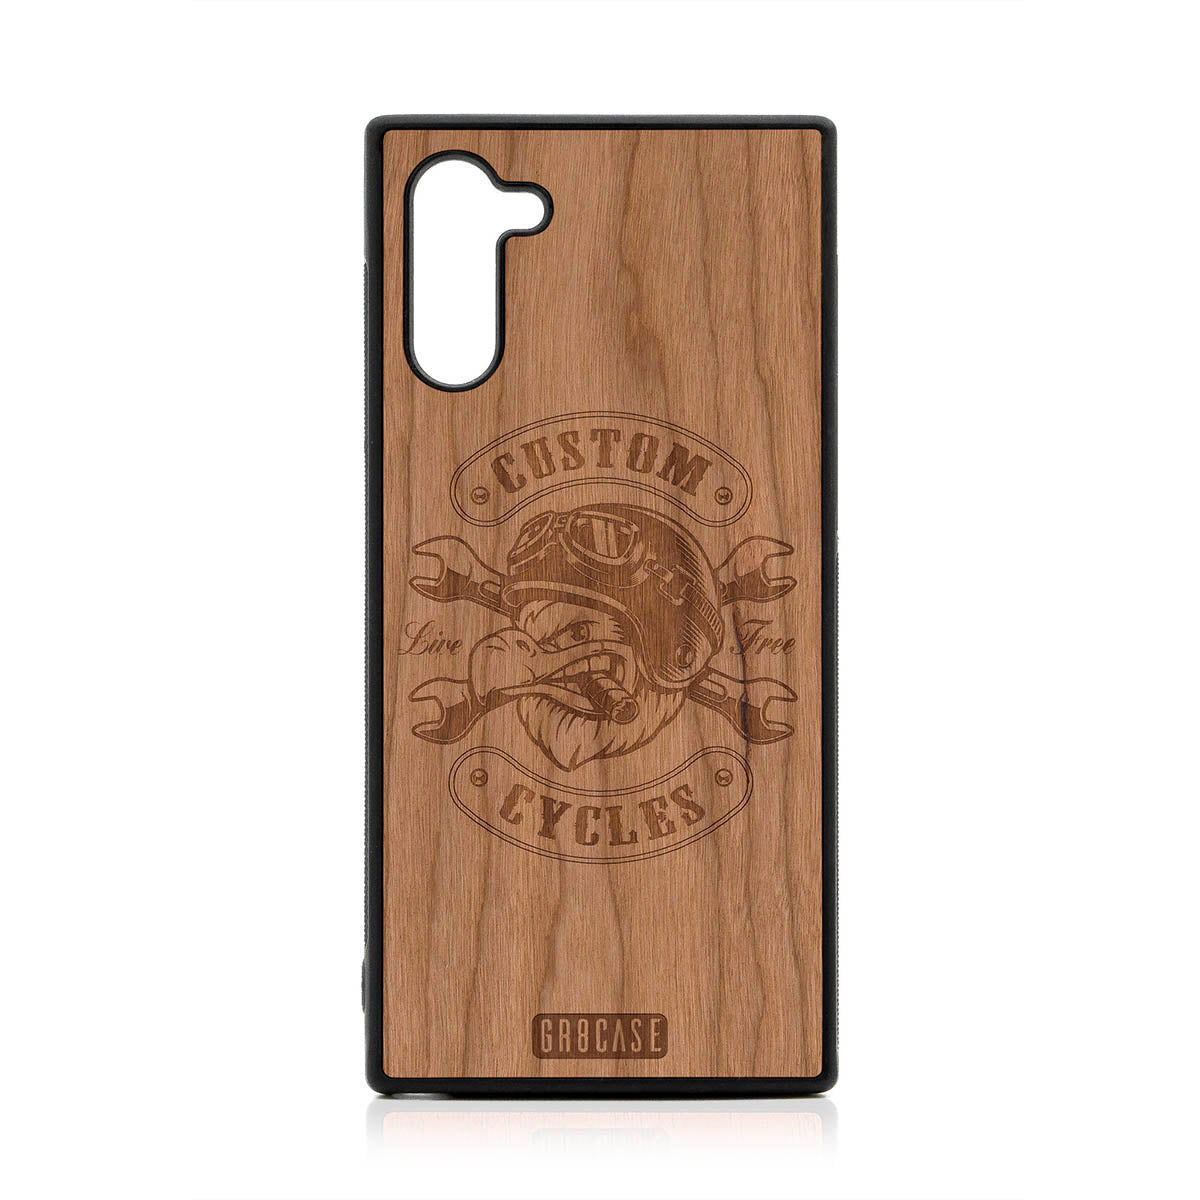 Custom Cycles Live Free (Biker Eagle) Design Wood Case For Samsung Galaxy Note 10 by GR8CASE